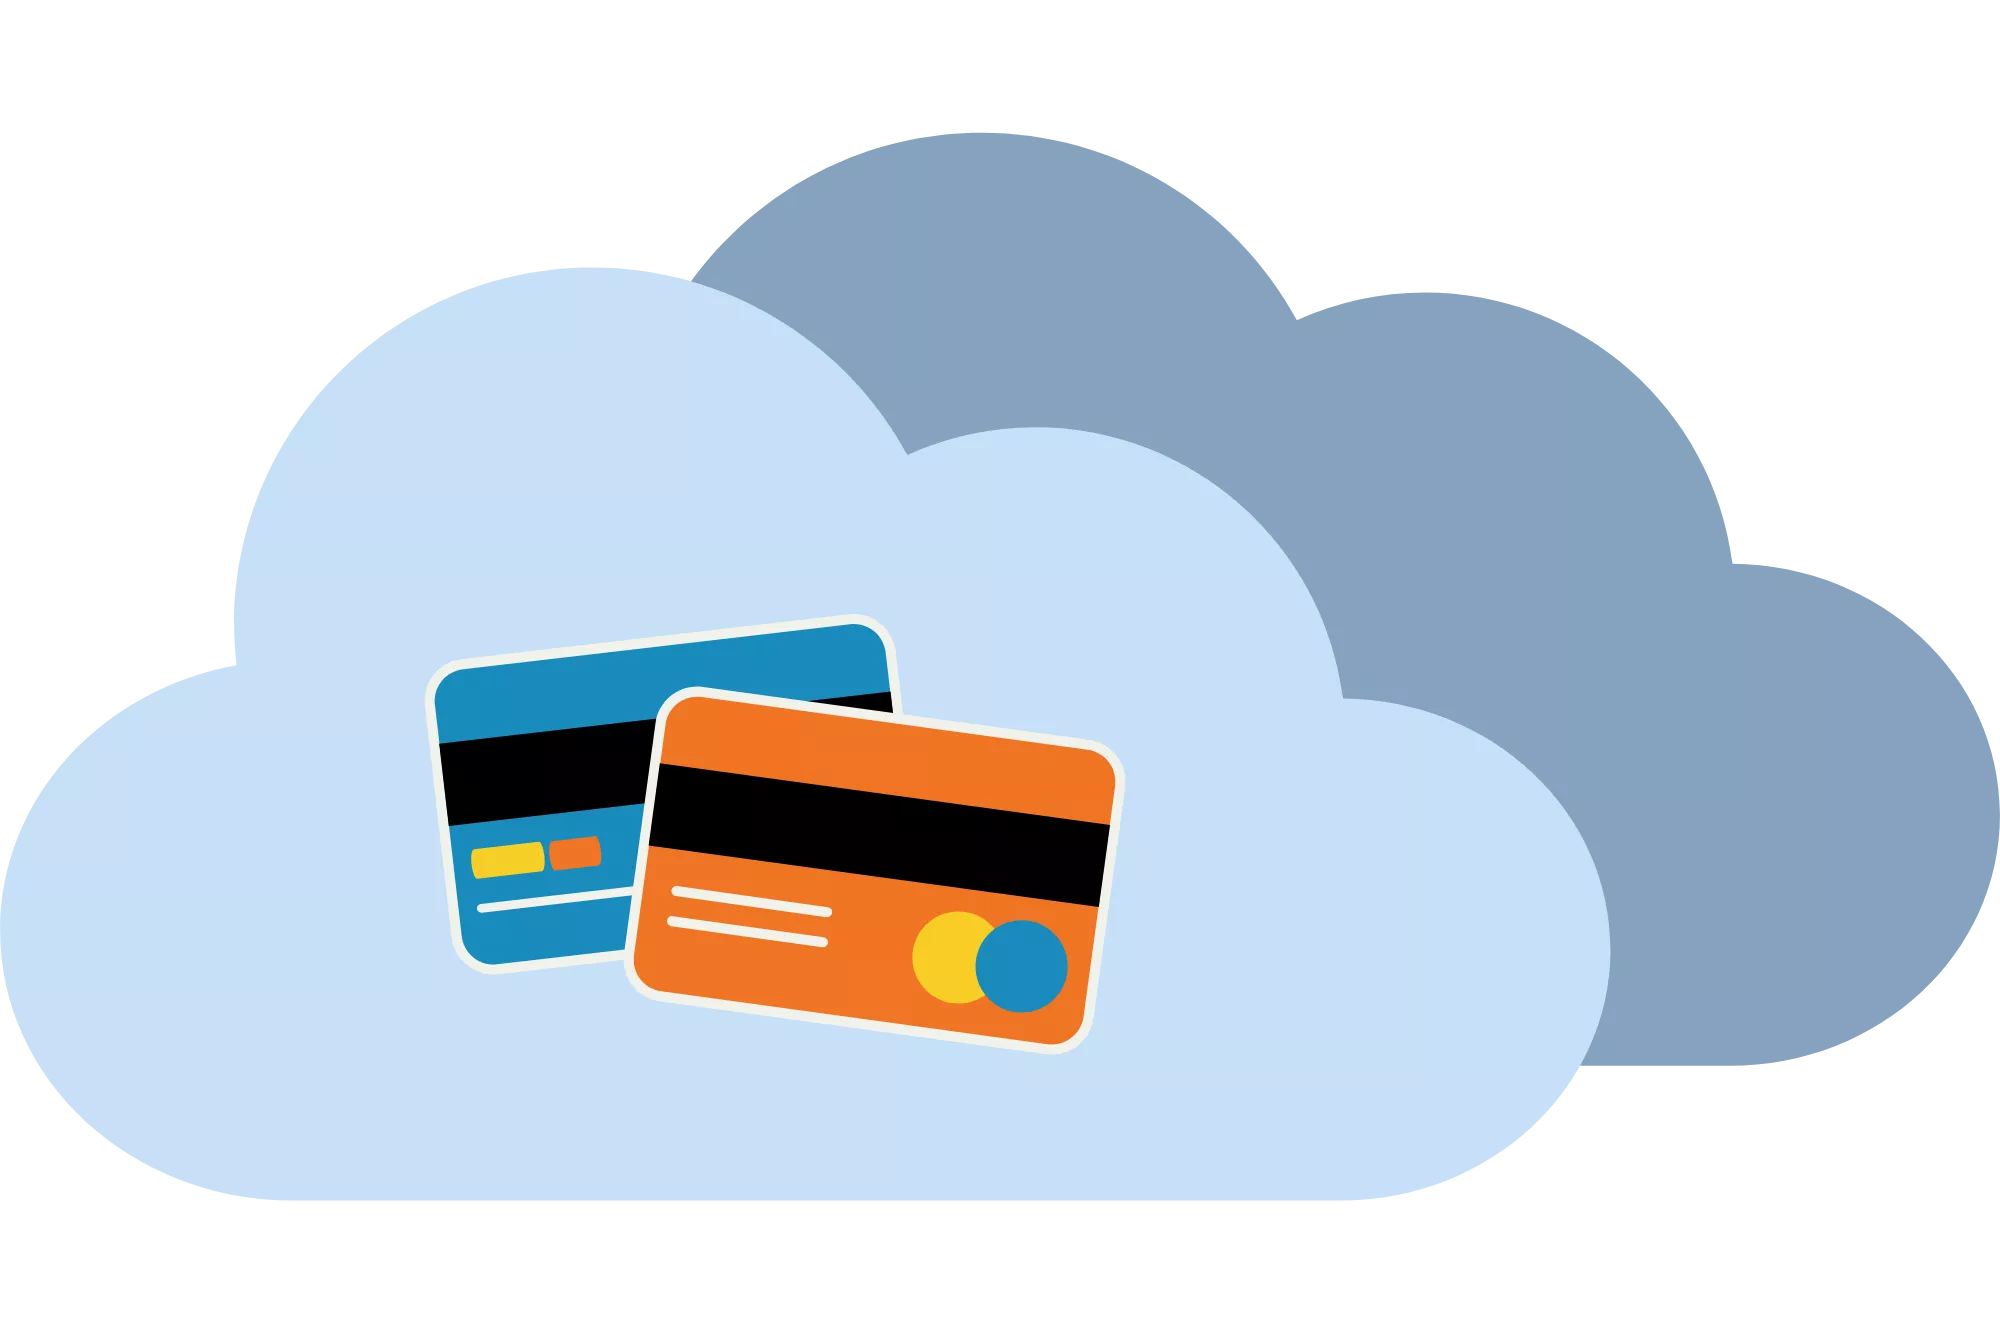 A cloud with credit cards in it that will process through payment orchestration.